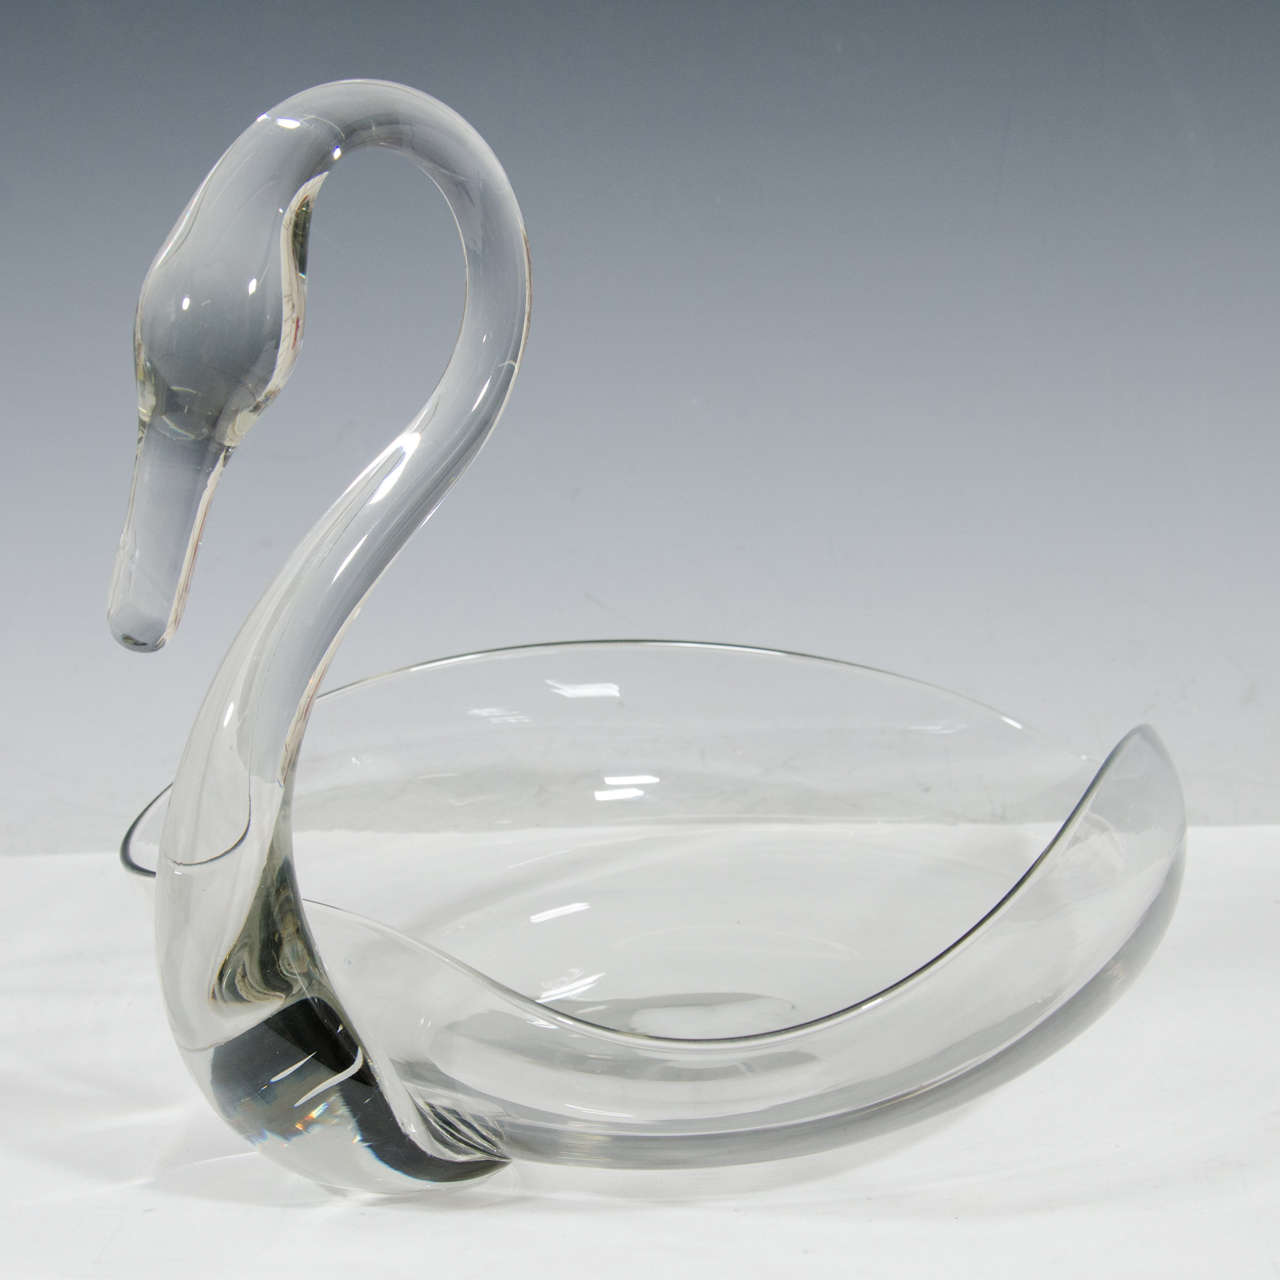 A vintage solid clear glass sculptural dish centerpiece, in the form of elegant swan. Good condition, consistent with age and use.

Two available sold individually.